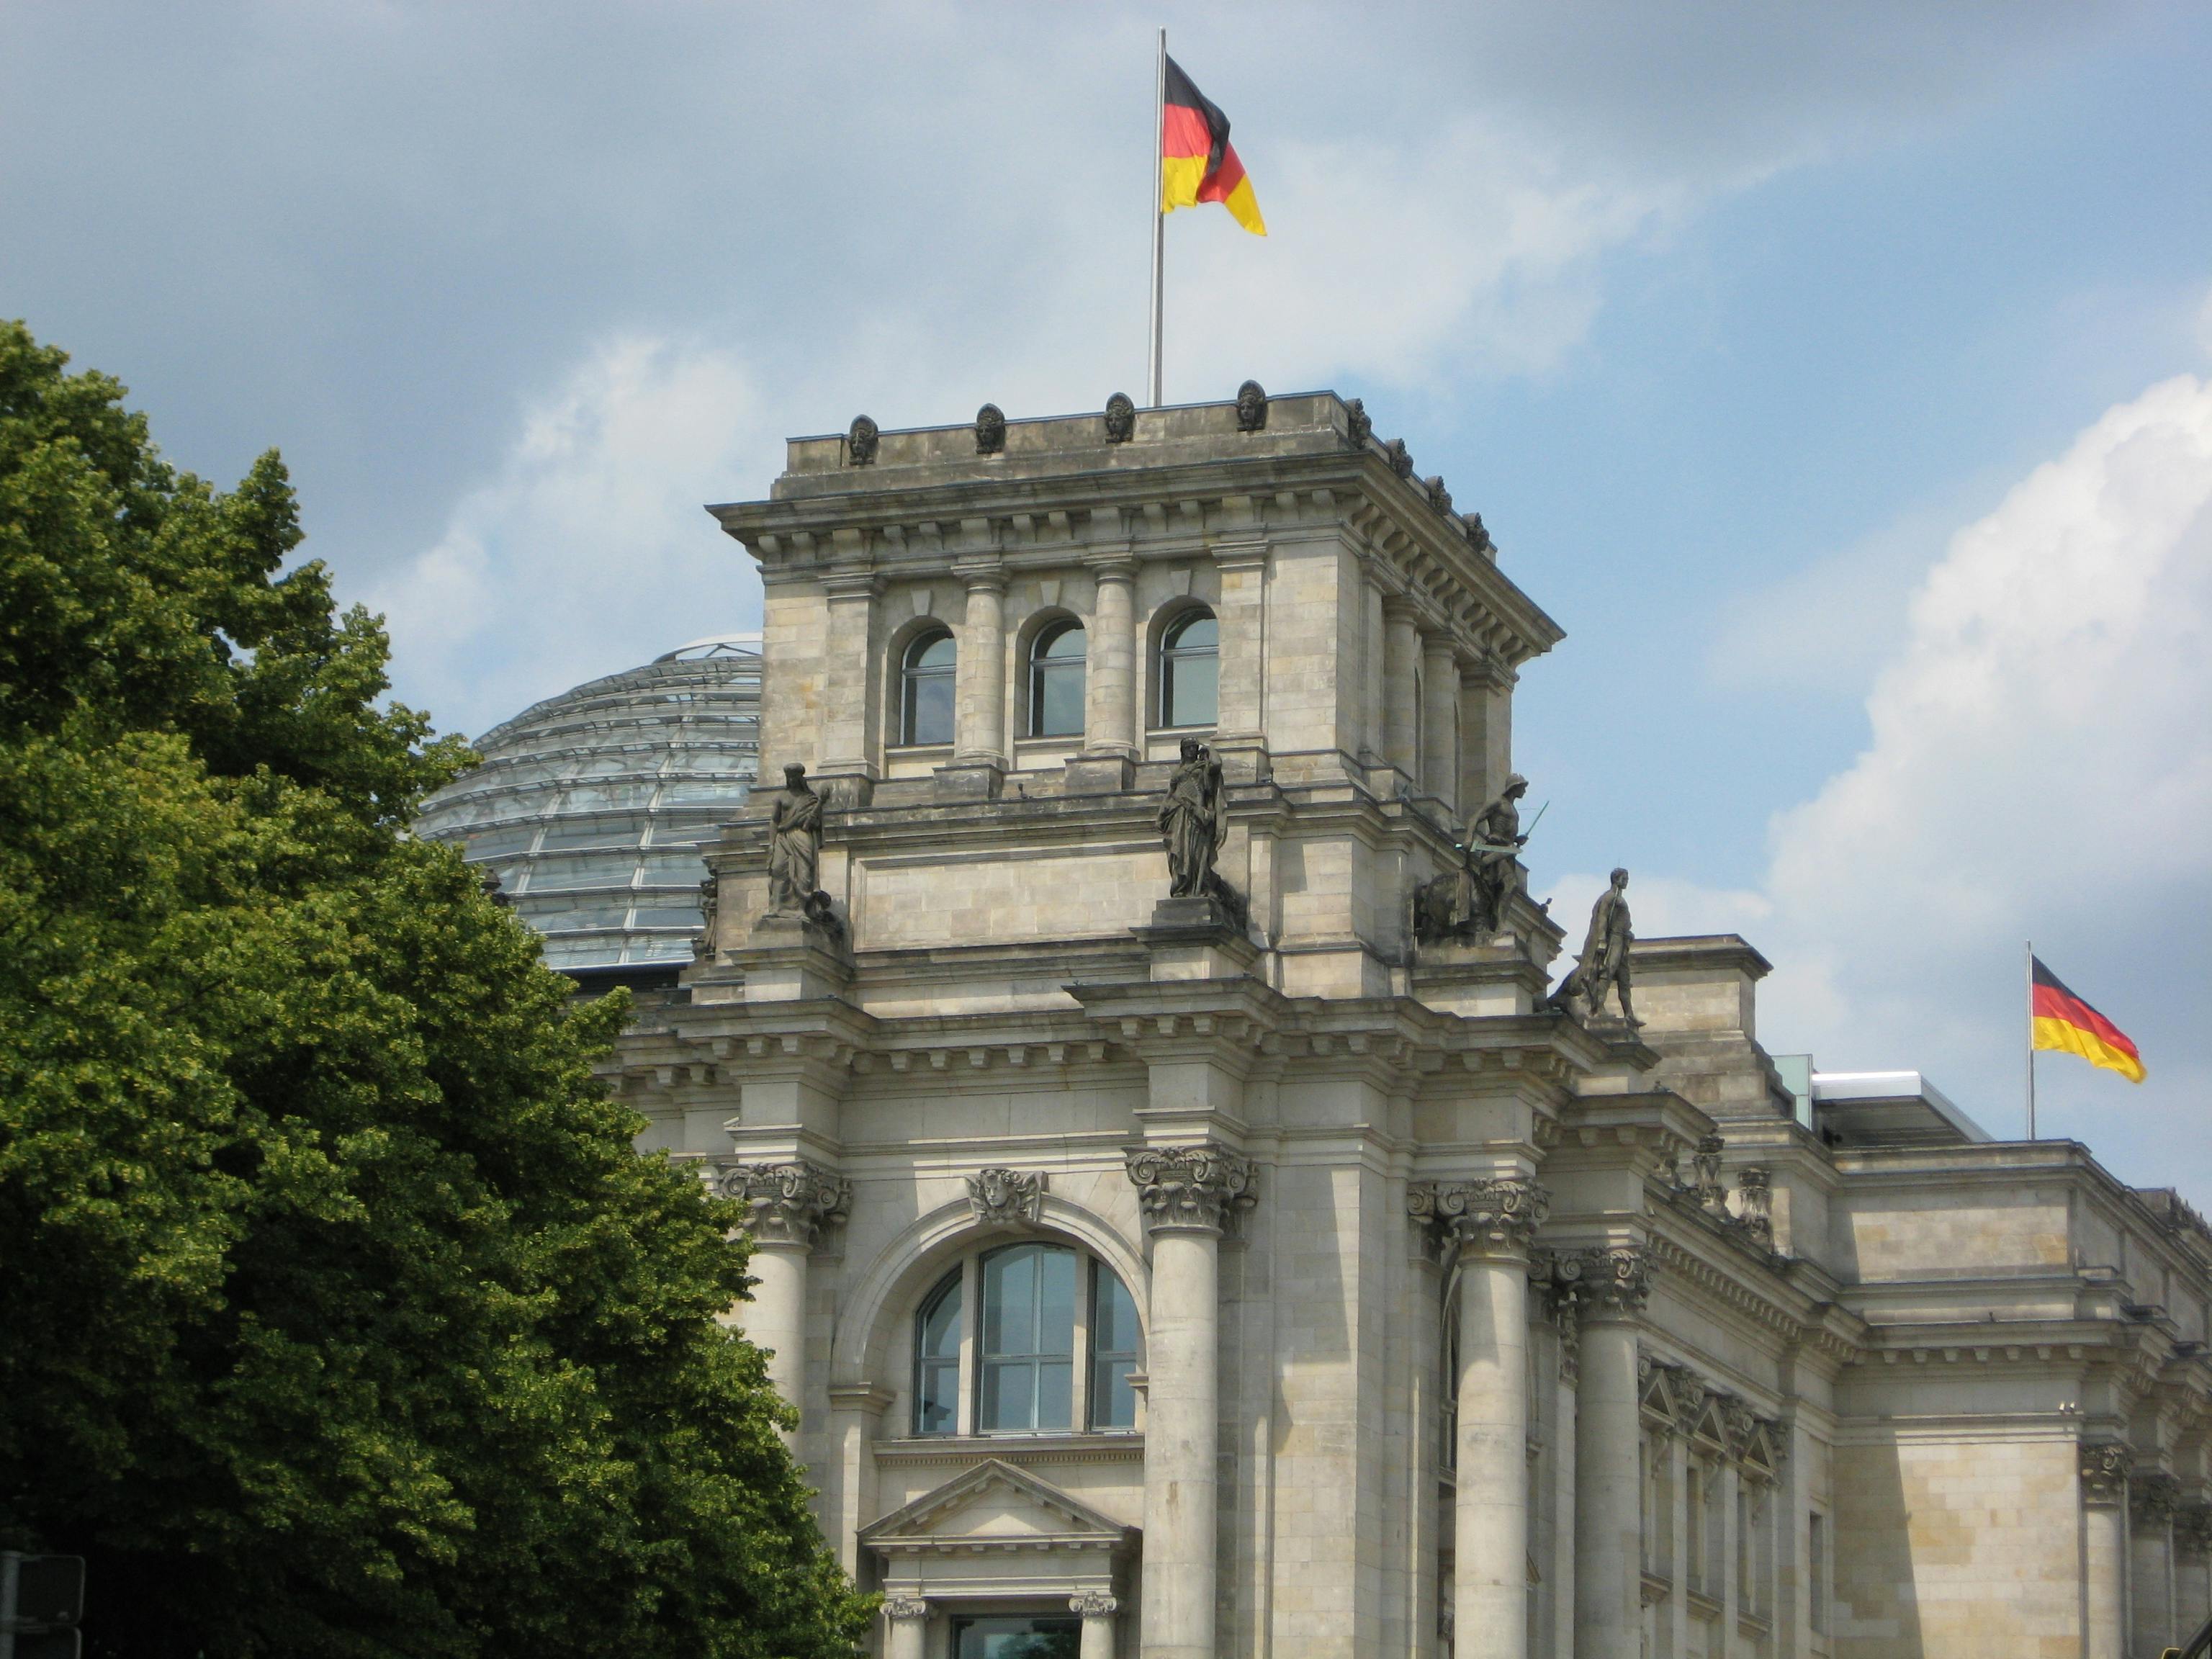 Private guided walking tour through Berlin